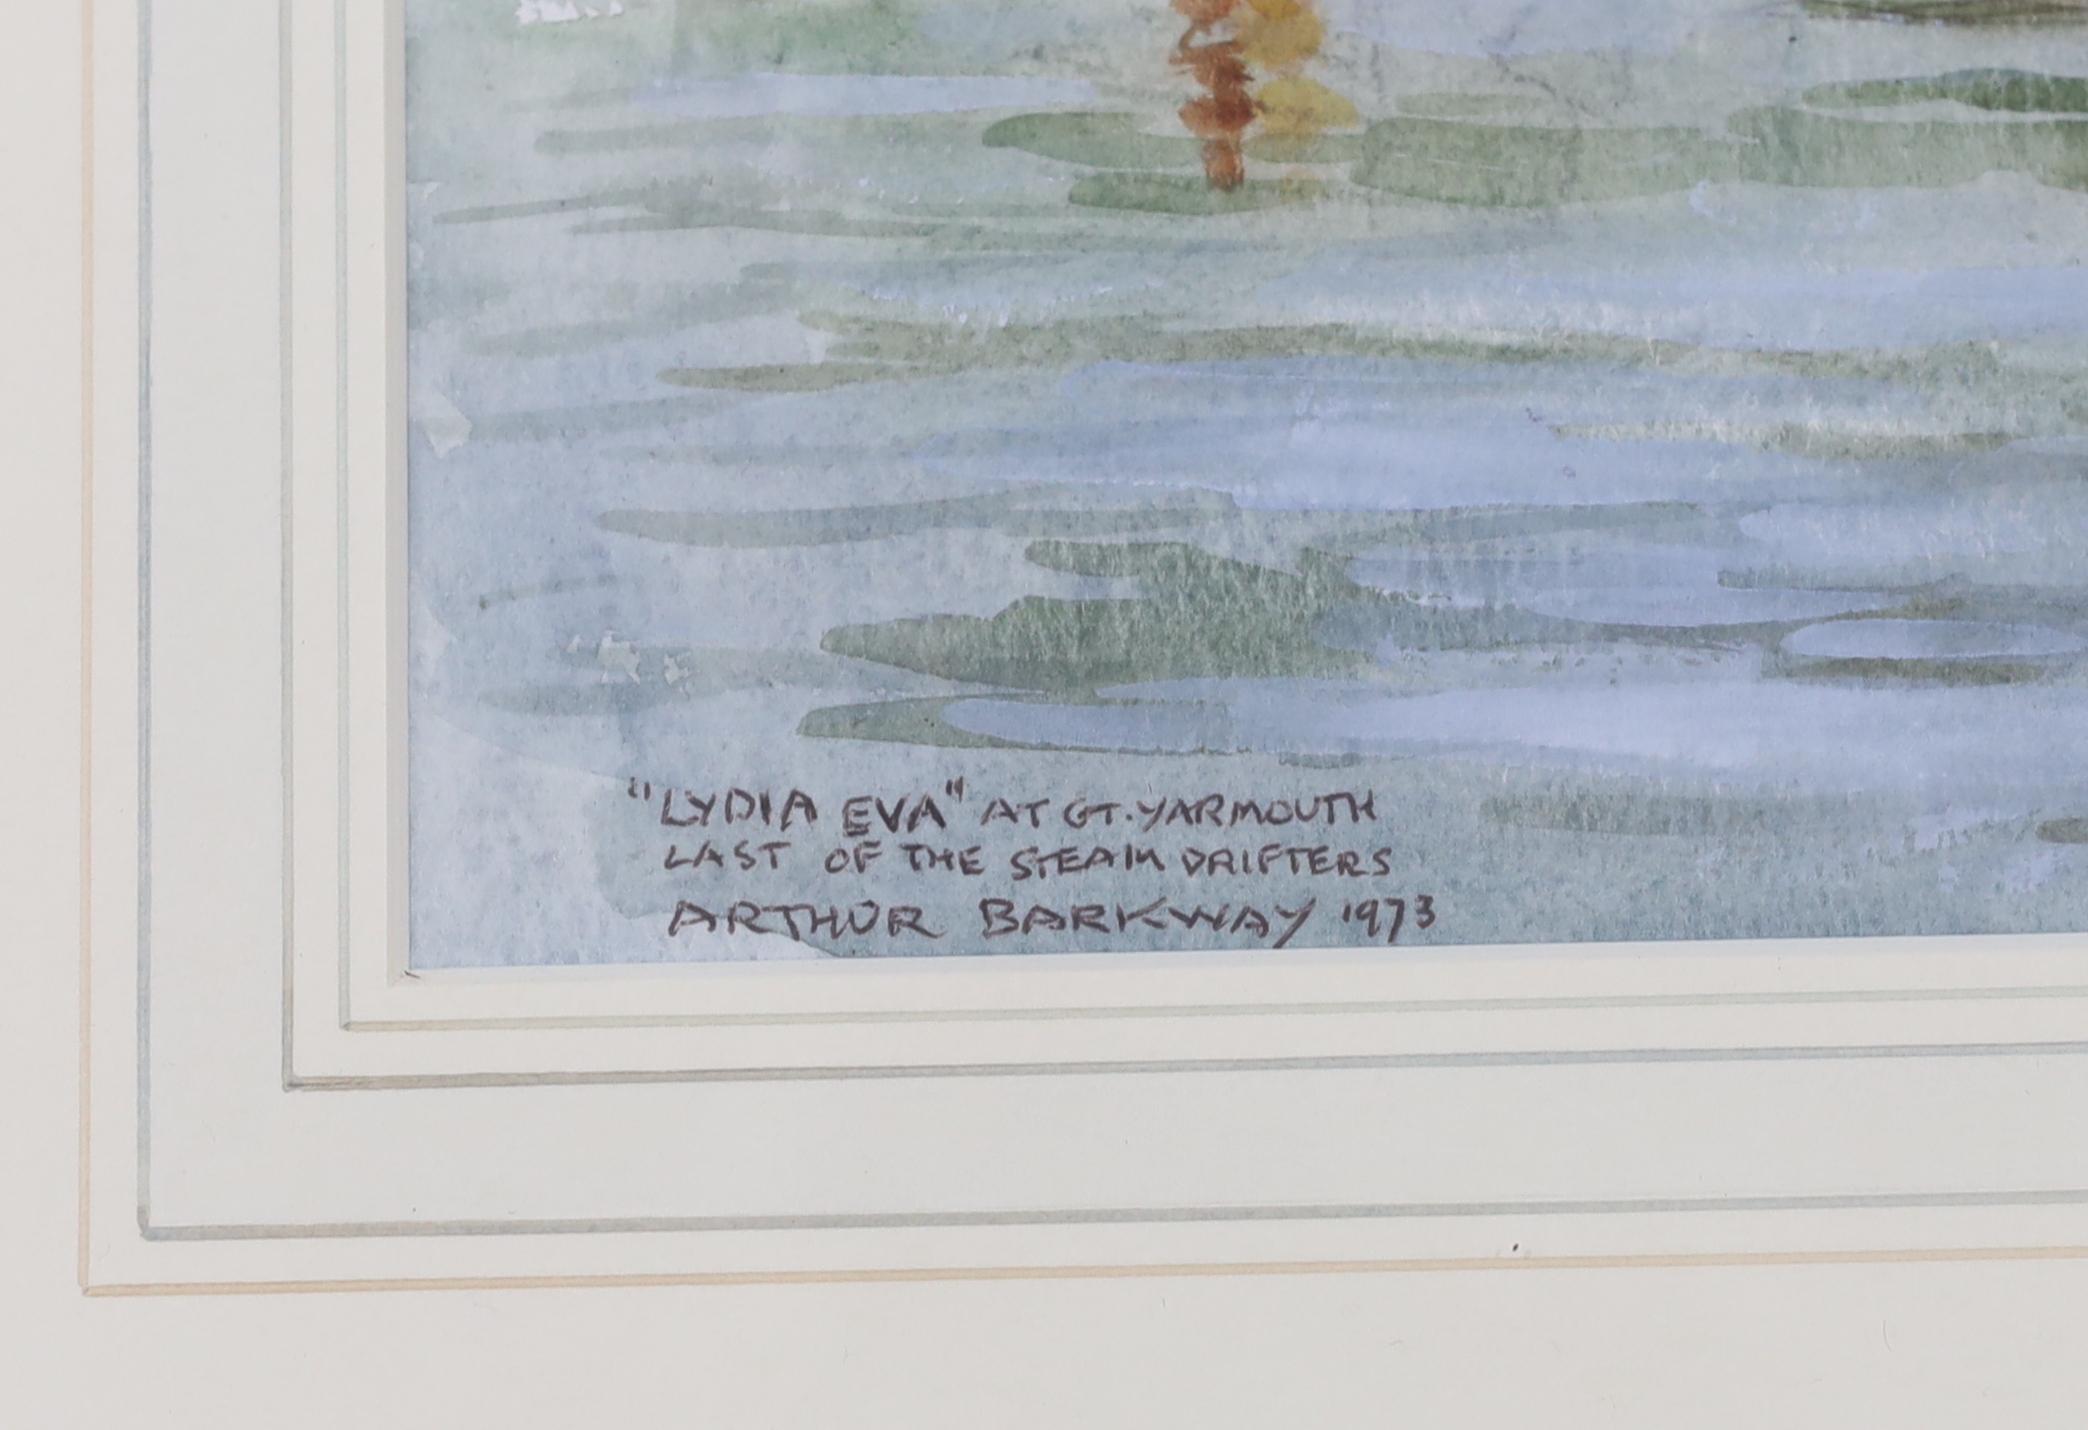 Arthur Barkway (act. 1964-1970), watercolour The Great Yarmouth steam drifter Lydia Eva YH89, the last working steam drifter, inscribed, signed and dated 1973, 24 x 34cm